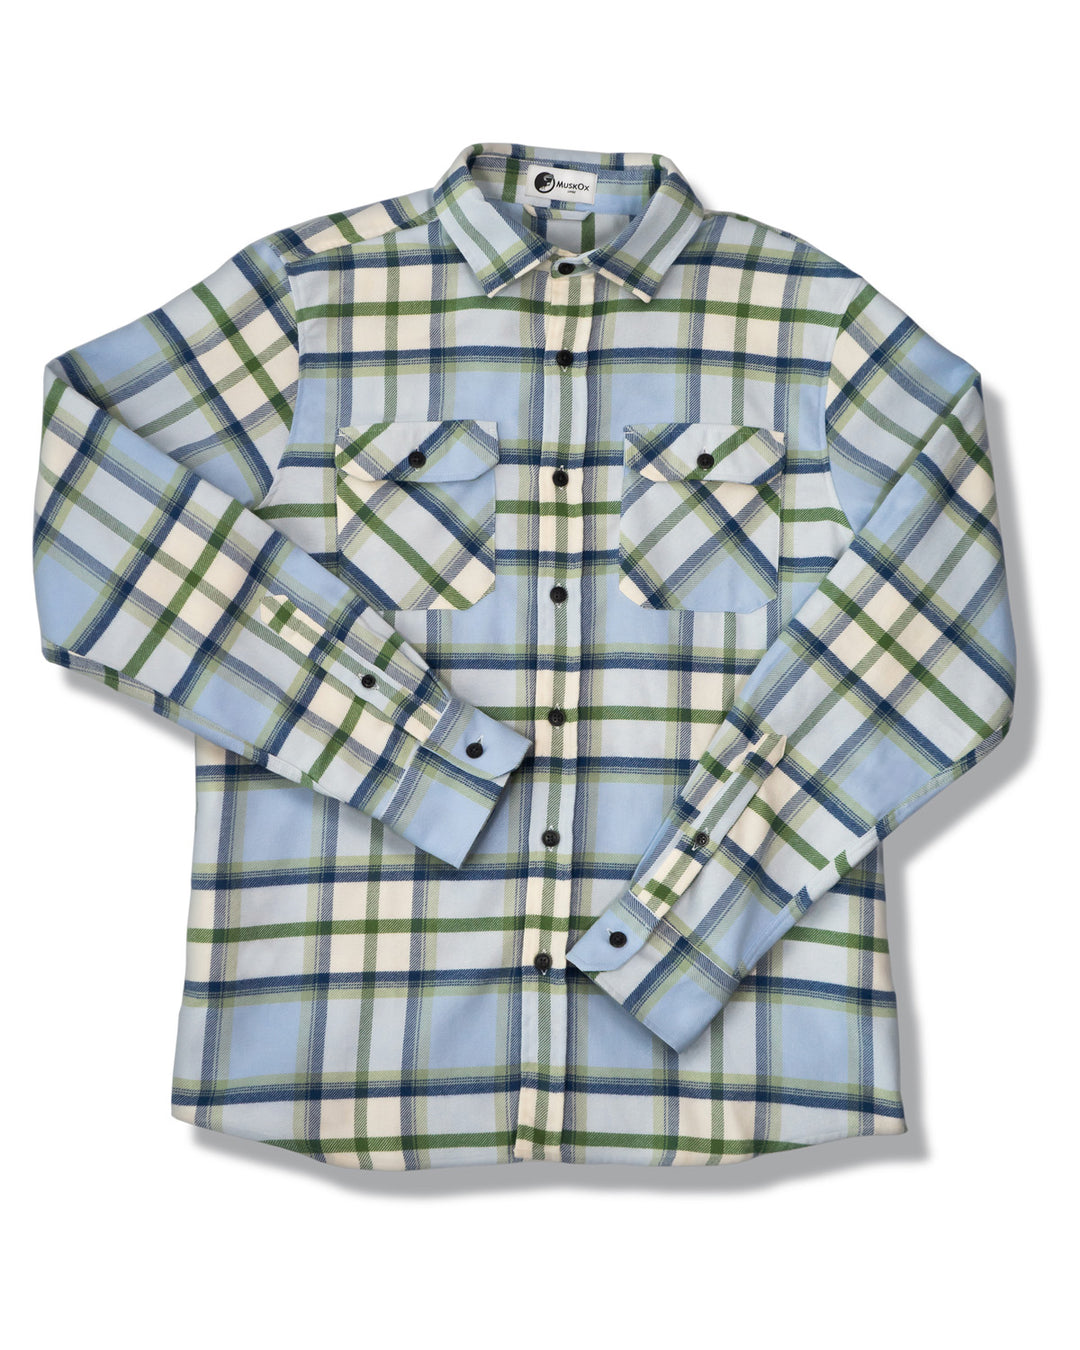 Muskox Flannels Three Seasons Flannel, Soft and Durable Flannel Shirt for Men M / Light Blue